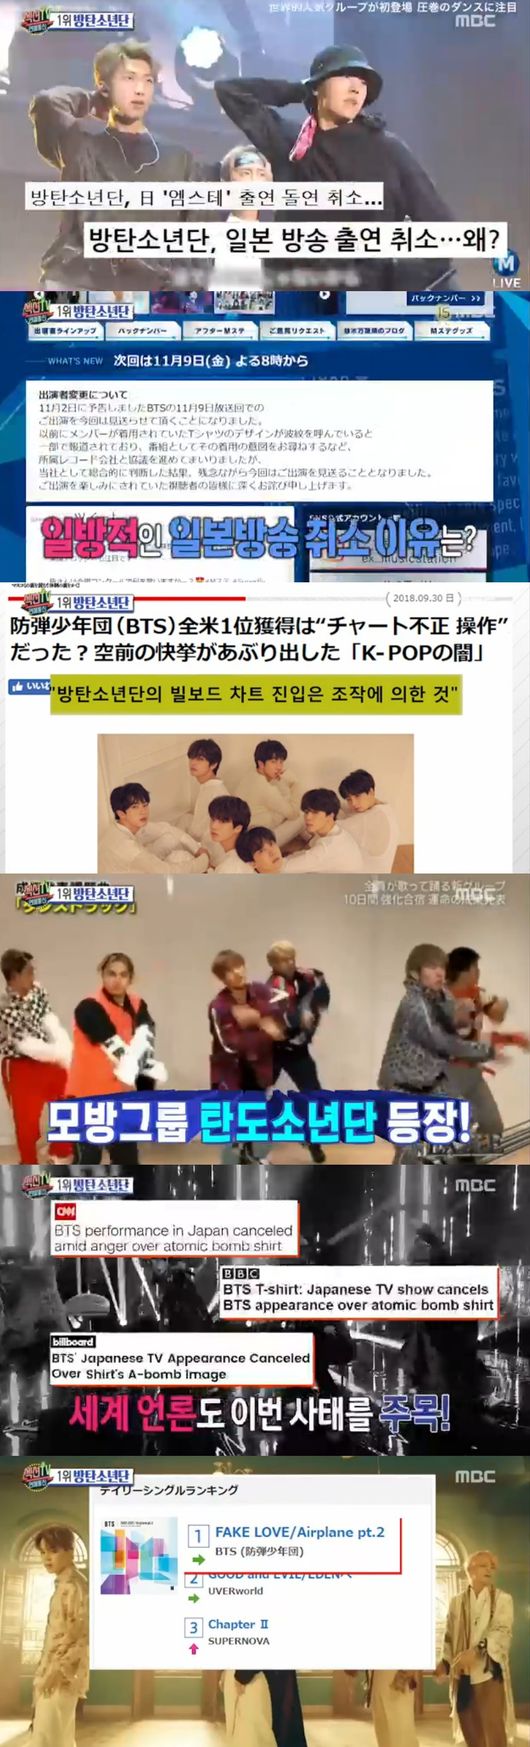 Deutsches Jungvolk, who imitated BTS in DeV, is still popular with BTS.MBC entertainment section TV entertainment communication broadcast on the 12th various news was reported.The news that actor Lee Jong-suk was detained in Jakarta Airport on the 4th was reported.A local promoter who went to Airport for departure but for convenience was seized on the passport, including Lee Jong-suk, who continued to tell the news via SNS and complained of frustration when he was detained at Airport.This was a hot topic, and it became a hot topic. As it turned out, the promoter in charge was not a job visa to receive for the performance but a tourist visa.Fortunately, he was released to detention, but he was saddened by the sight of Lee Jong-suk, who was worried that the new drama scheduled for the next day of his return, was shedding tears.Lee Jong-suk, a small company, announced a court response against a local promoter, and the poor Korean Wave performance system attracted attention.Singer Jung Joon-young also made headlines when he opened Paris Restaurant, which became the restaurant CEO in France.The concept of Seoul to Paris has been in preparation for three years. It is a hot topic from the visit of a close friend to the Korean Michelin chef and the collabor.Especially, Korean food was released with a course dish familiar to the French, and it was already painted as a guest by the local peoples taste.Everyone supported the food service business that had been dreaming for a long time by running a cooking blogger.The news of BTS is also indispensable: the day he was scheduled to appear on Japans Music Station, he was notified of cancellation two hours before his departure, and his agency also posted his official position only that evening.The reason for the unilateral cancellation was that the T-shirt design that the member was wearing was excommunicated, and the appearance was delayed by asking about the intention of wearing clothes.The problematic T-shirt was worn by member Jimin in YouTube documentary.Korean Liberation Army photos were printed in English, with the letters of patriotism, history, and liberation and Korean Liberation Army.RM was also accused of working on the Korean Liberation Army Memorial Twitter Inc. intellectual anti-Japanese activities.In addition, Japan continues to denigrate BTS Billboard charts and awards as manipulation.World media also noted that there is a historical background for forced labor during the Japanese colonial rule.Japan continued to be conscious of the World-popular BTS.Similarly, Transformers Deutsches Jungvolk is also deV and is aiming for the Billboards chart.Rather, BTS has continued to be hot in this controversy.Japan Oricon Daily Singles chart No. 1 and Japan is scheduled to start the Dome Tour from the 13th.It is said that it will mobilize a total of 380,000 viewers, and cheered for the BTS activities of the National Security Shenyang Stone.Section TV Entertainment Communication Broadcast Screen Capture